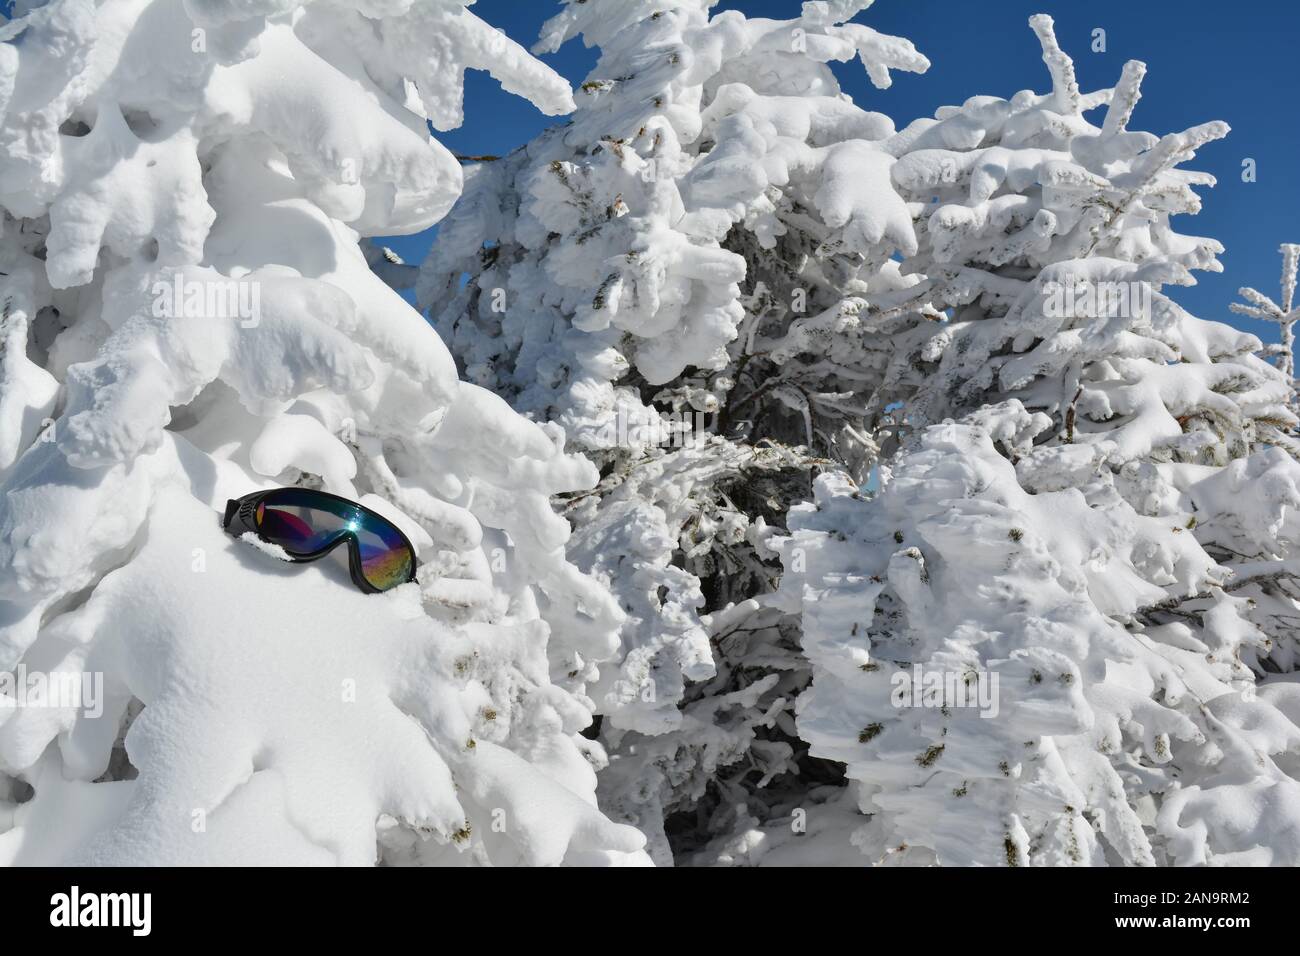 Nival background with goggles, full frame of fir trees covered by snow and forgotten goggles, Mt .Kopaonik, Serbia Stock Photo